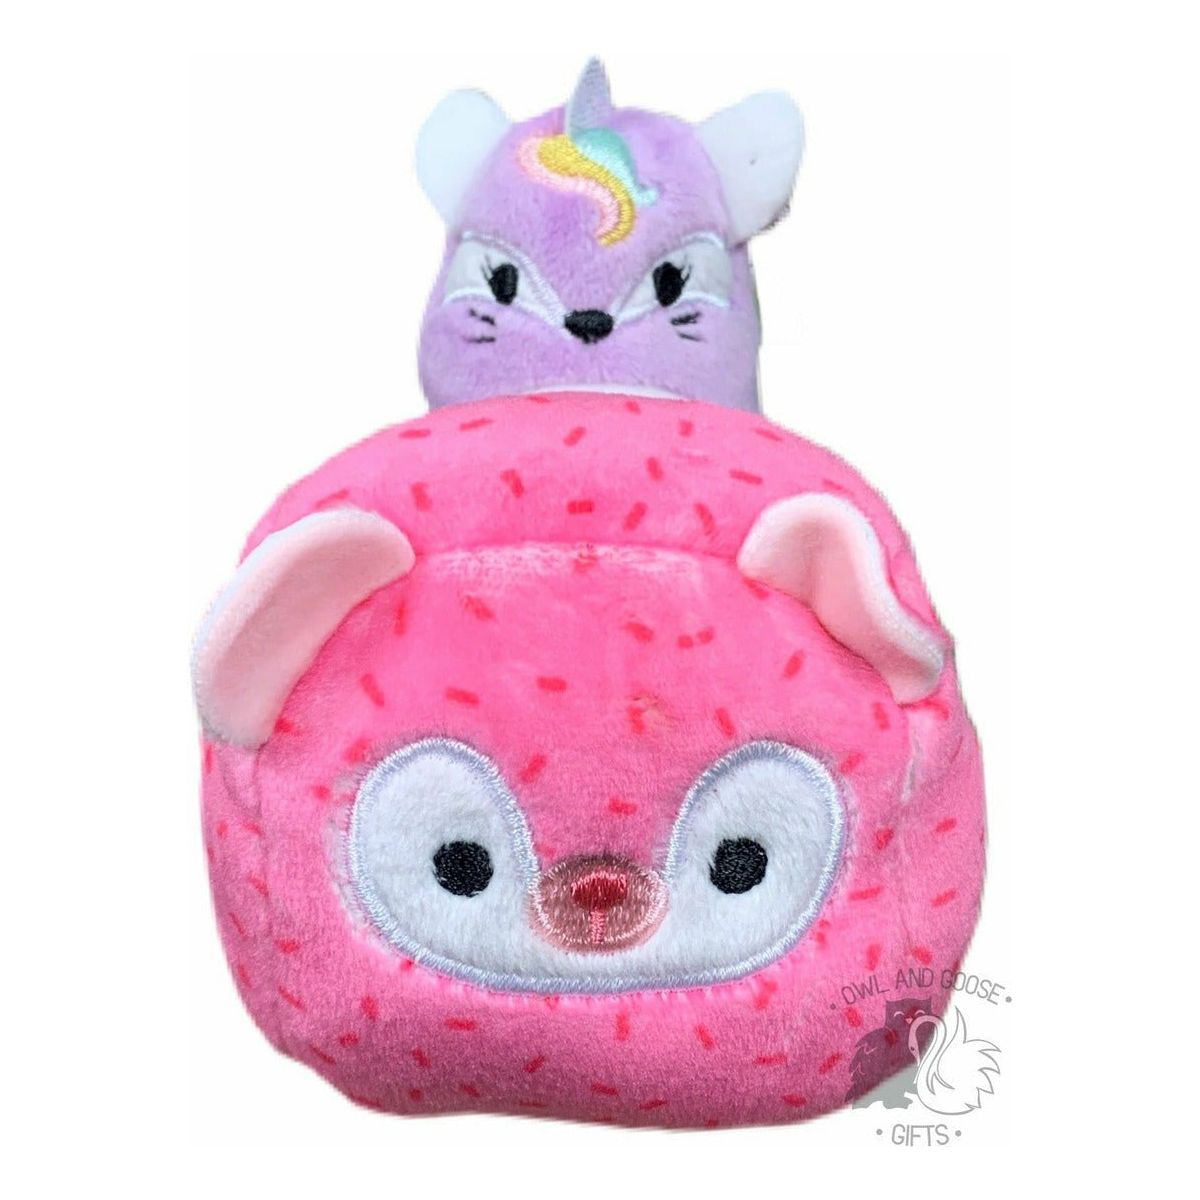 Squishmallow 2 Inch Sharde the Fox Squishville Vehicle - Owl & Goose Gifts